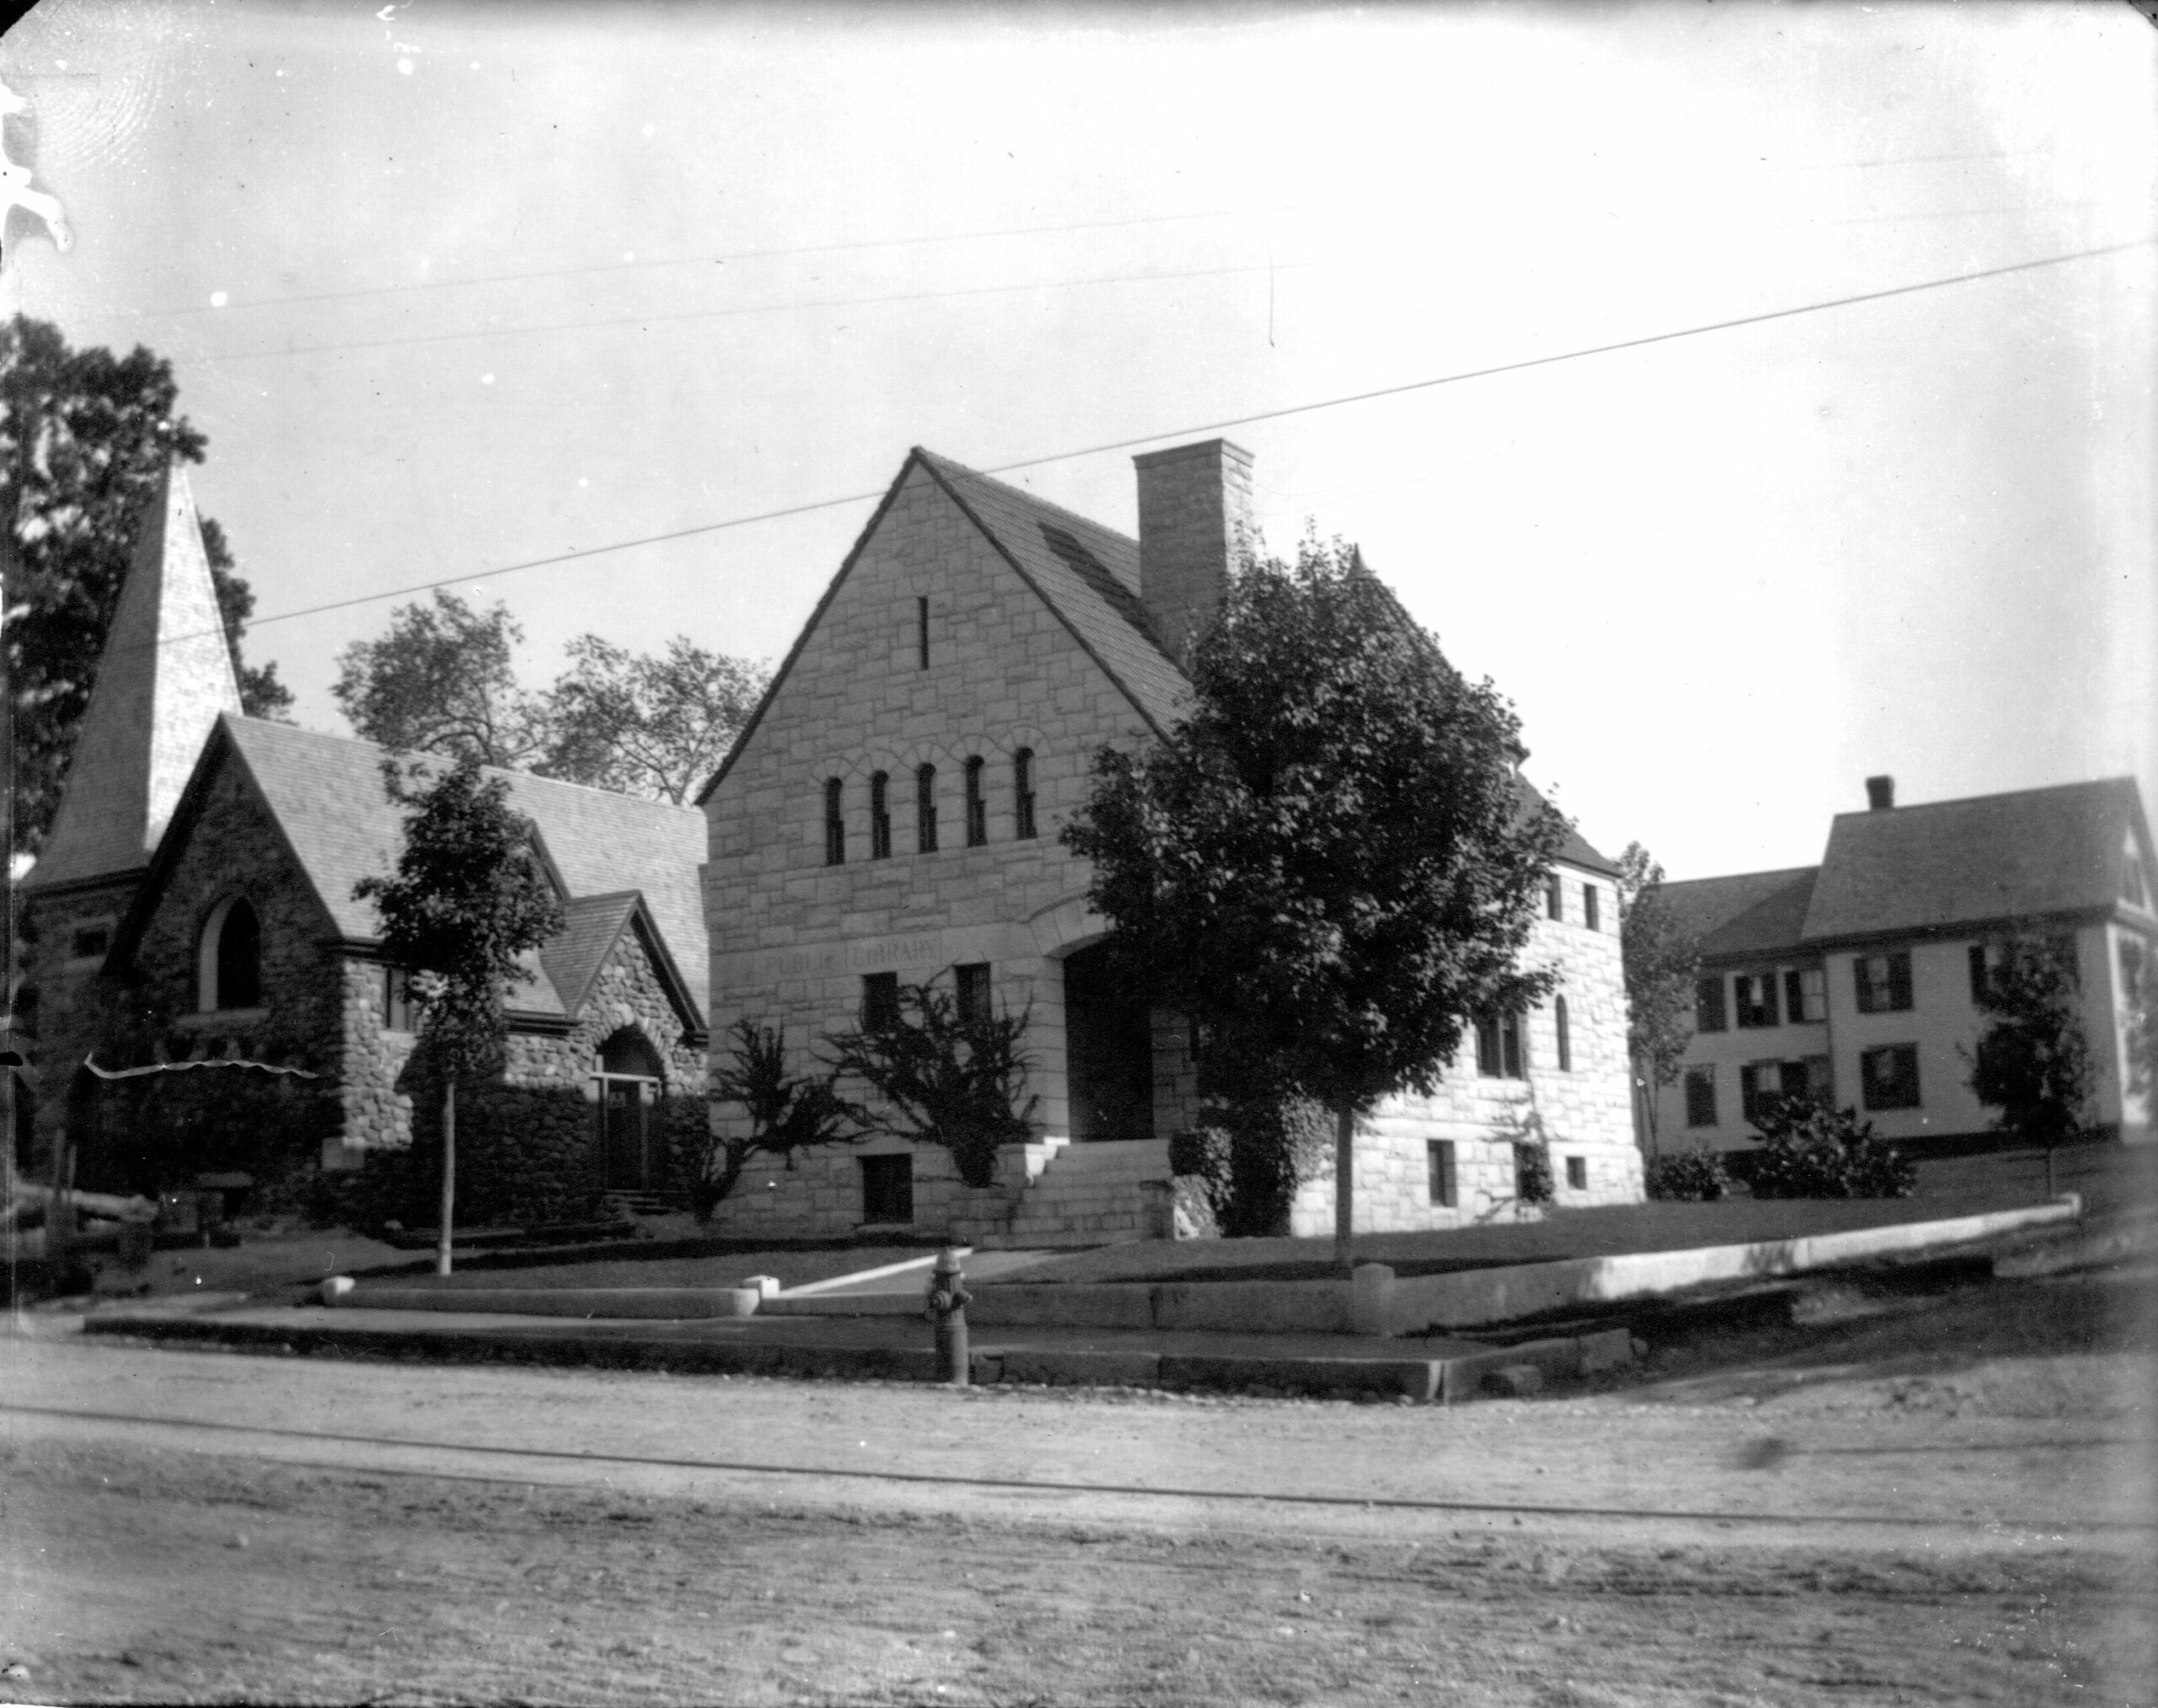 Historic image of the library from 1940